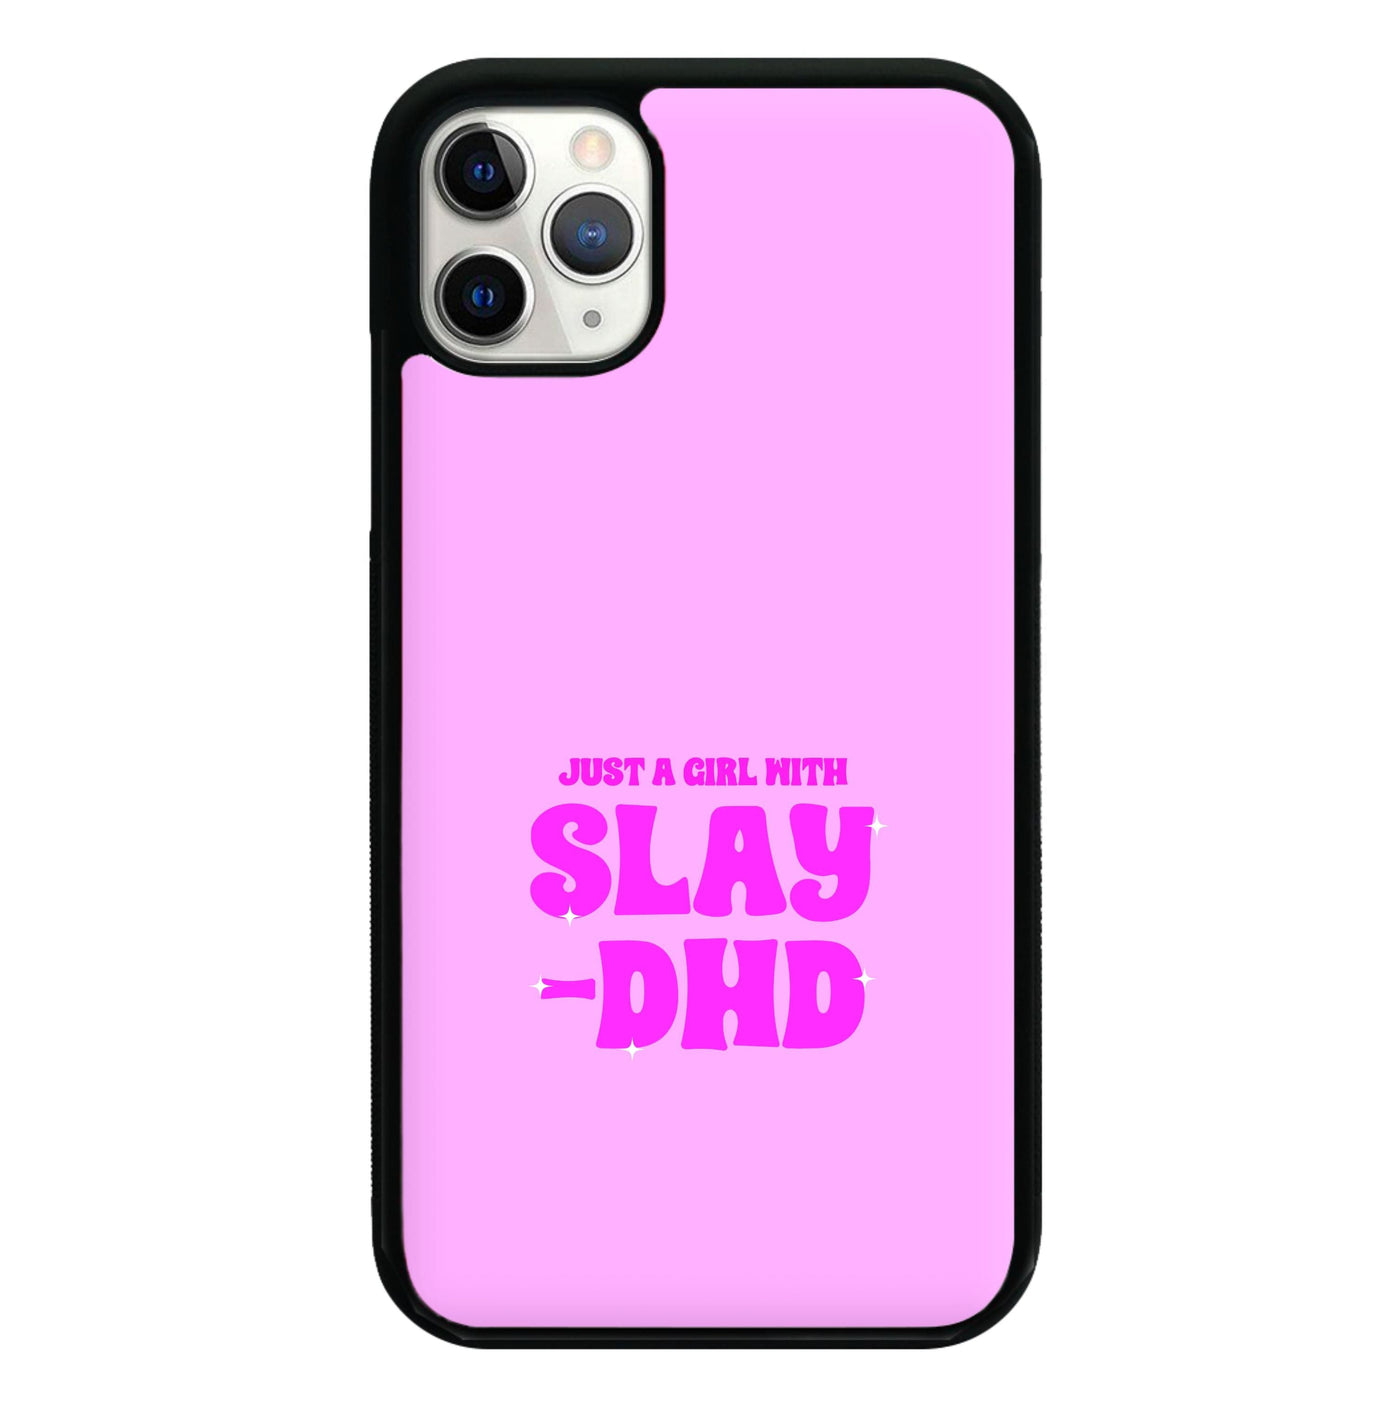 Just A Girl With Slay-DHD - TikTok Trends Phone Case